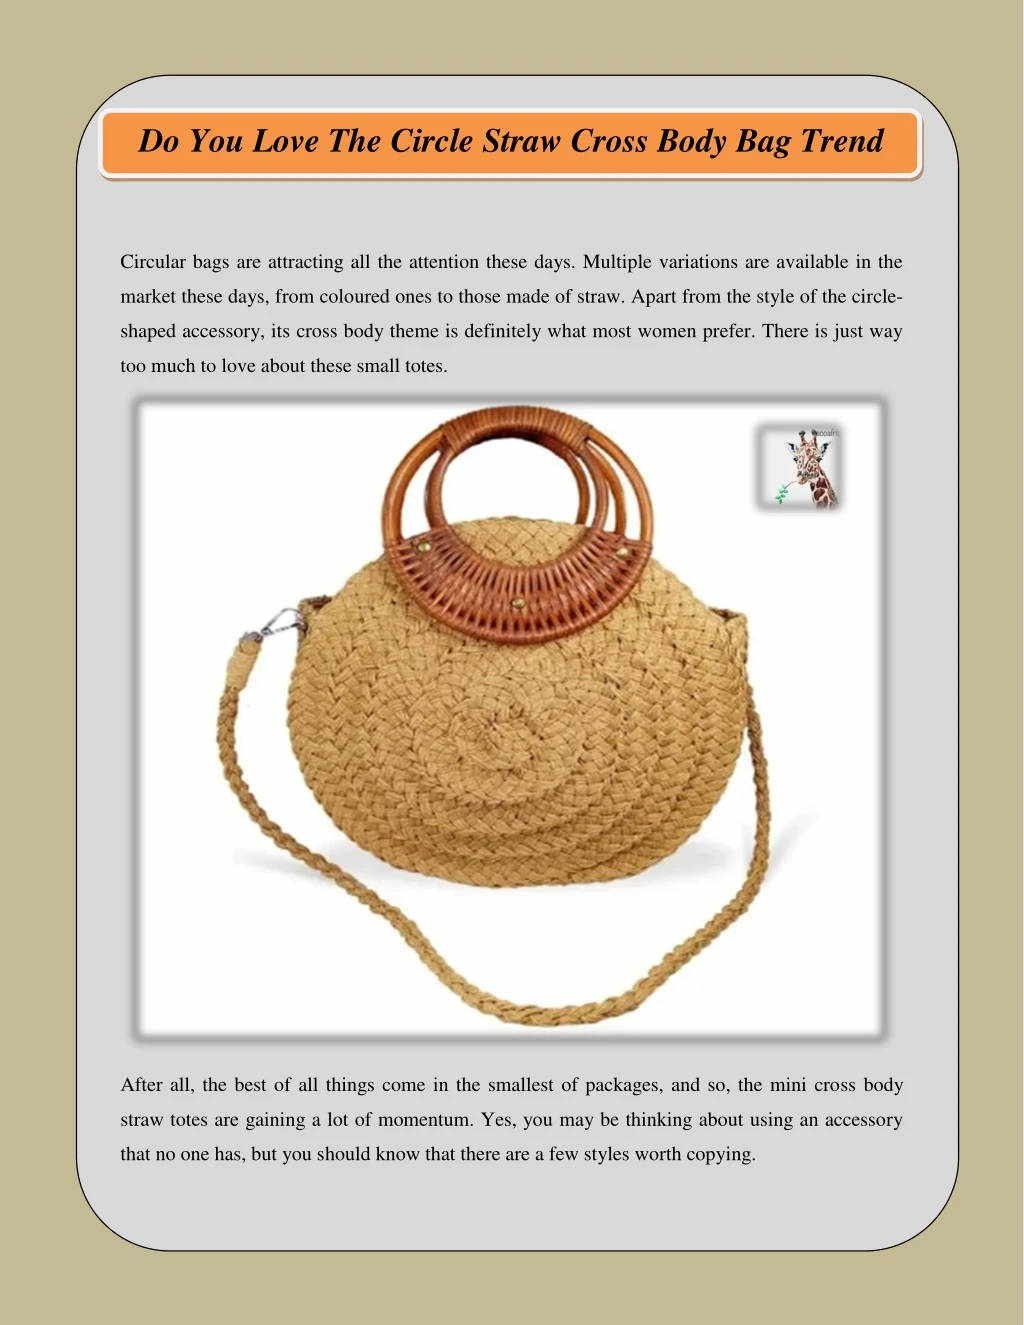 do you love the circle straw cross body bag trend